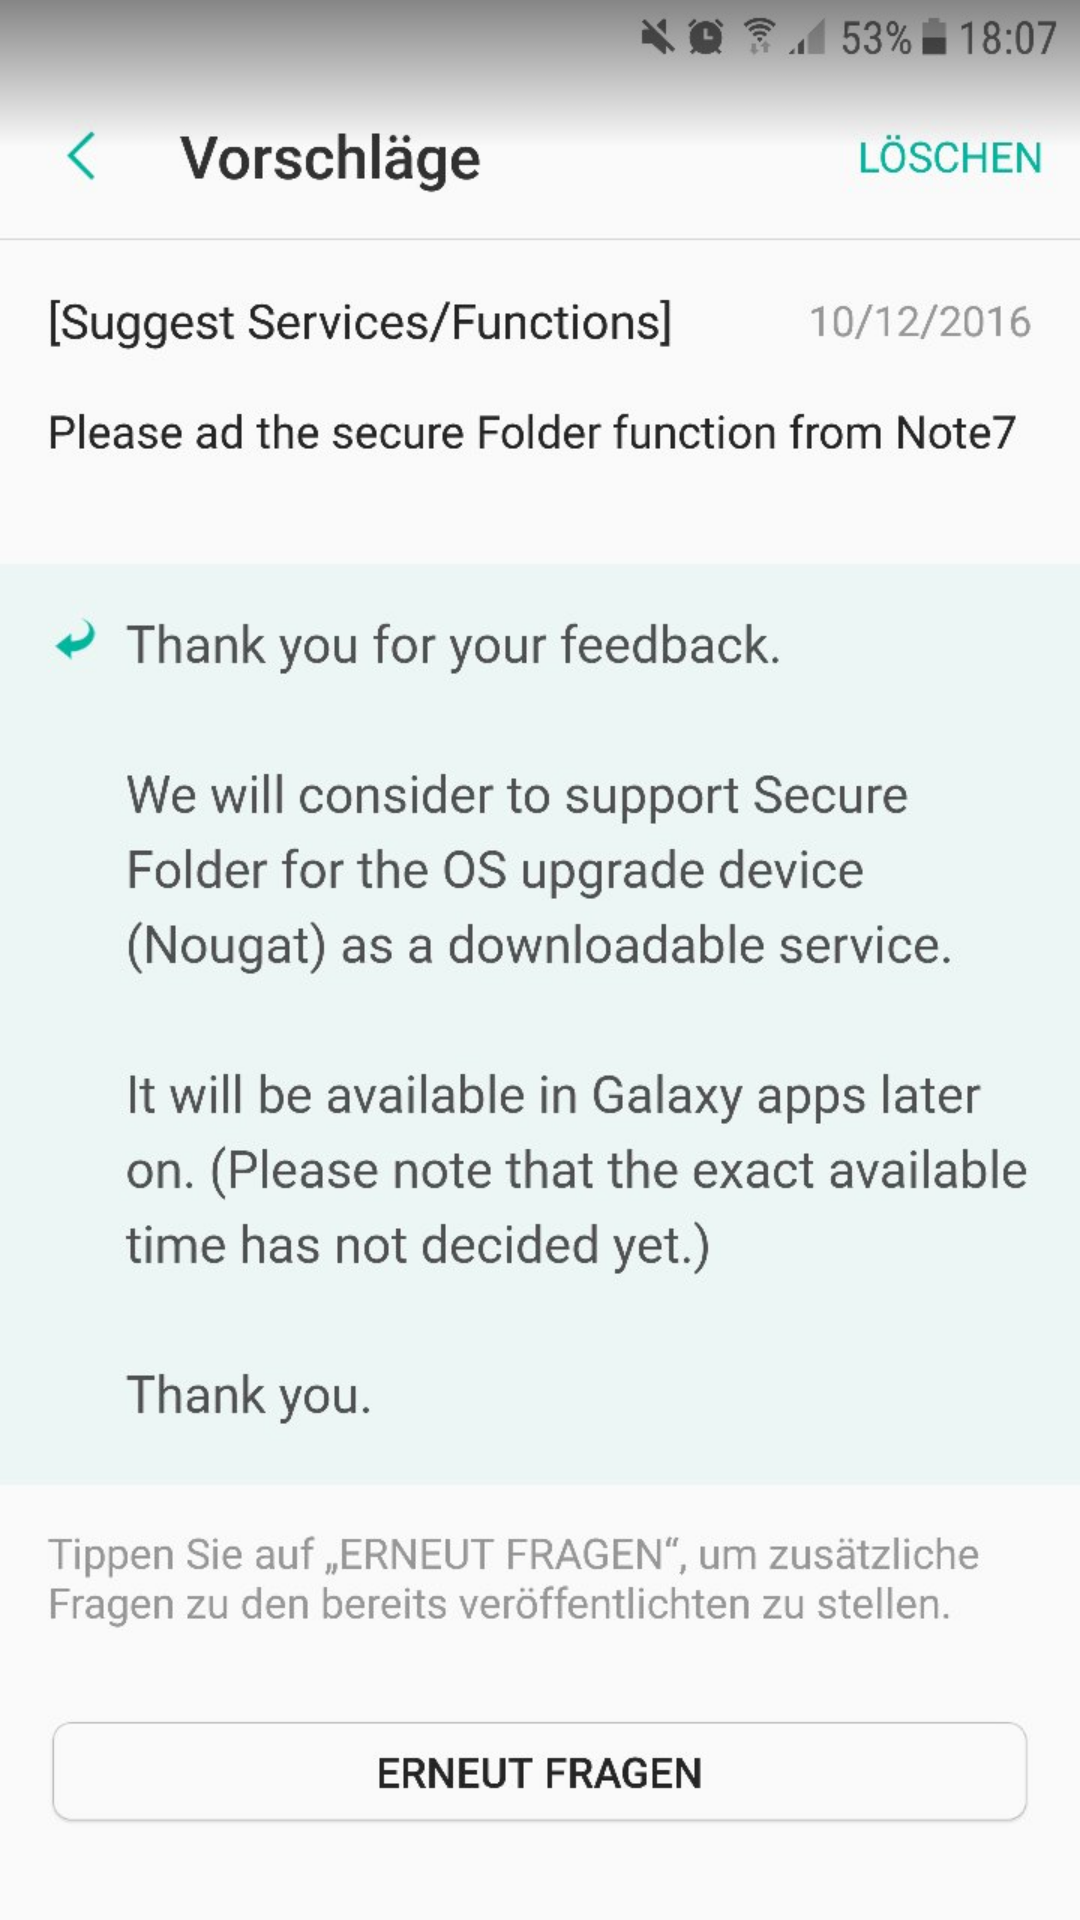 Note 7's Secure Folder option may arrive for Galaxy S7 after the Android 7.0 update